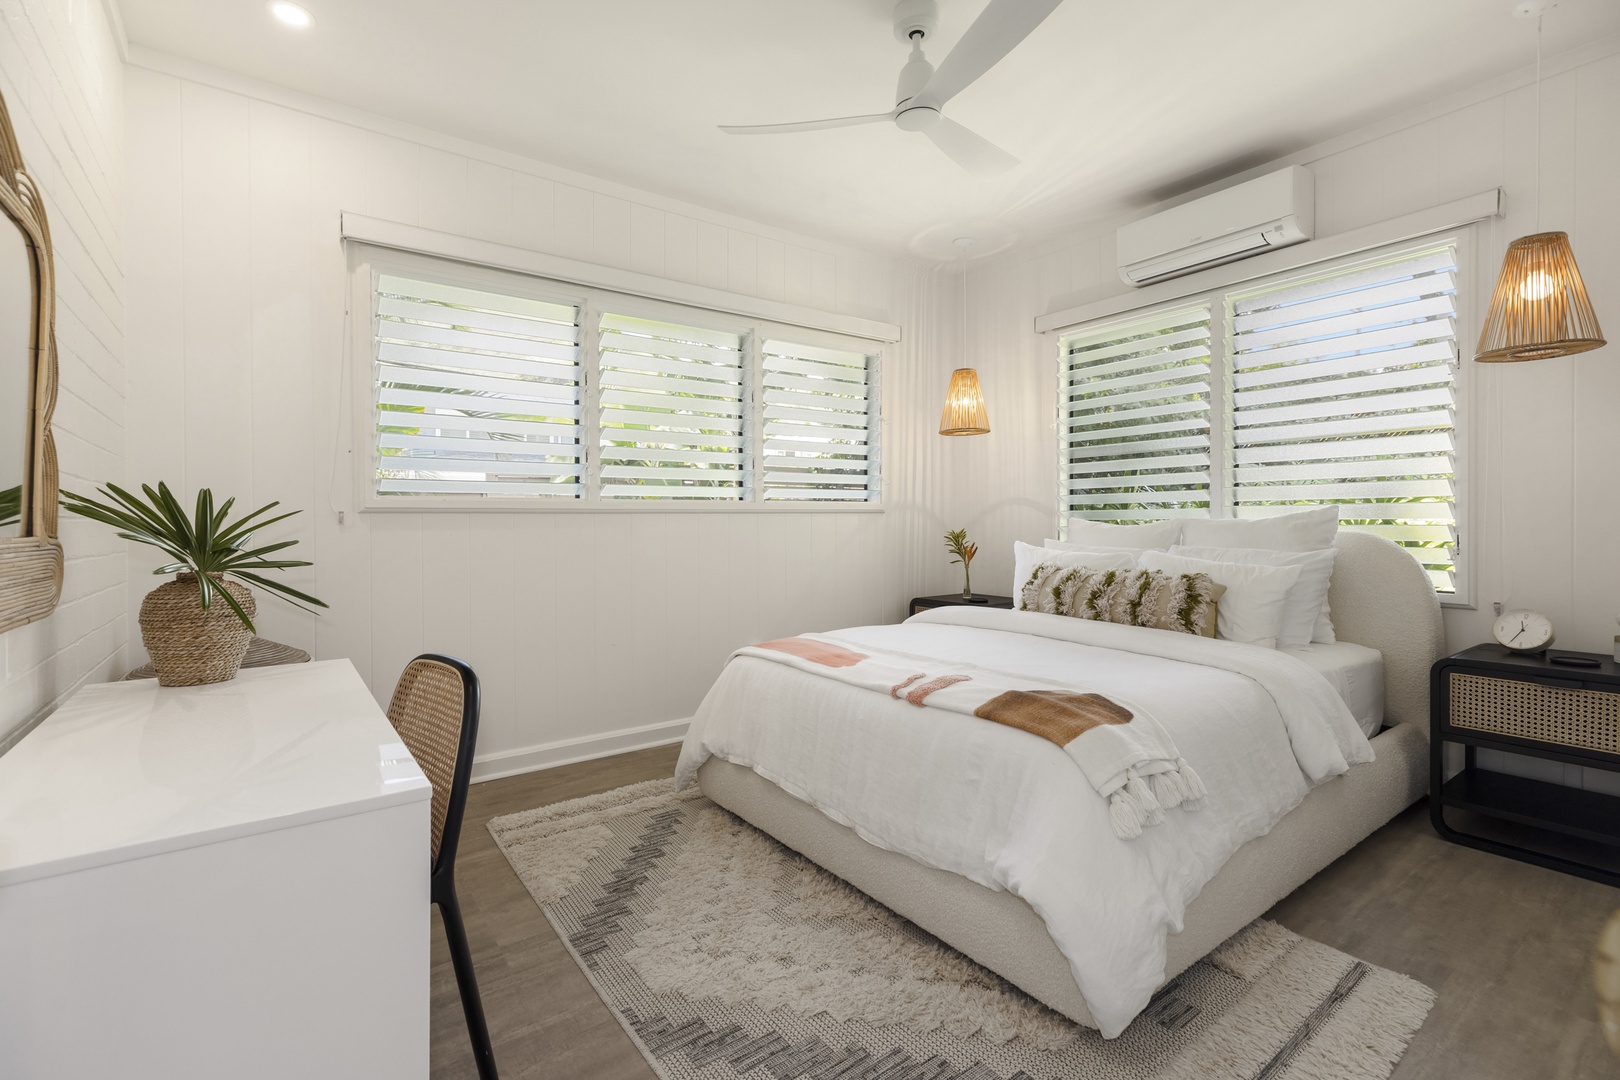 Kailua Vacation Rentals, Lanikai Hideaway - Guest bedroom with natural light and individual AC